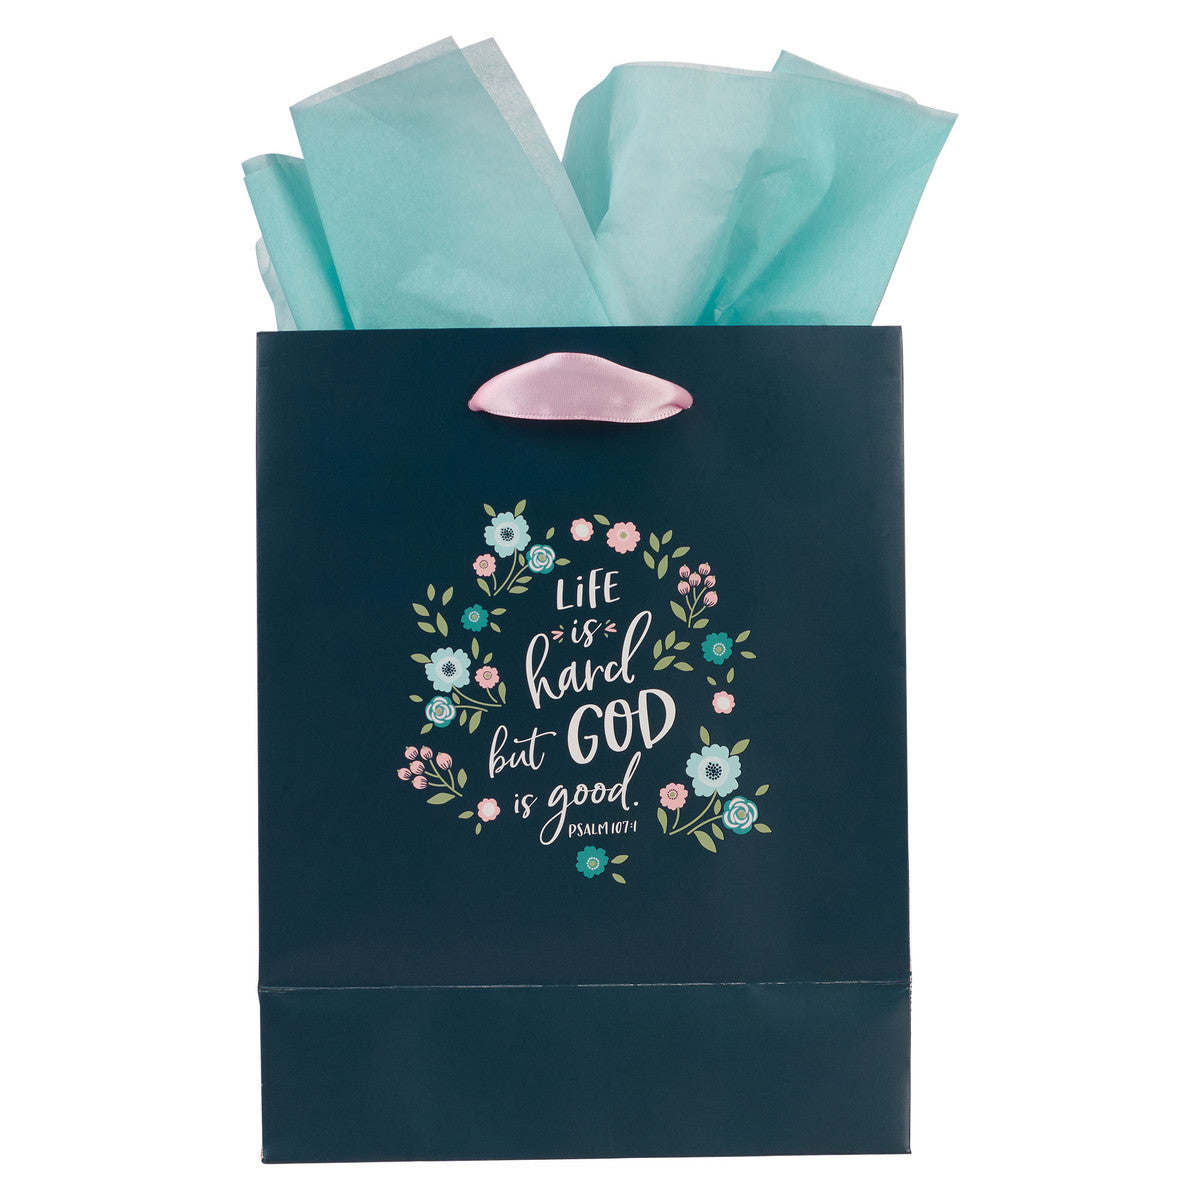 Let's Celebrate Blue Floral Medium Gift Bag - Psalm 107:1 - The Christian Gift Company